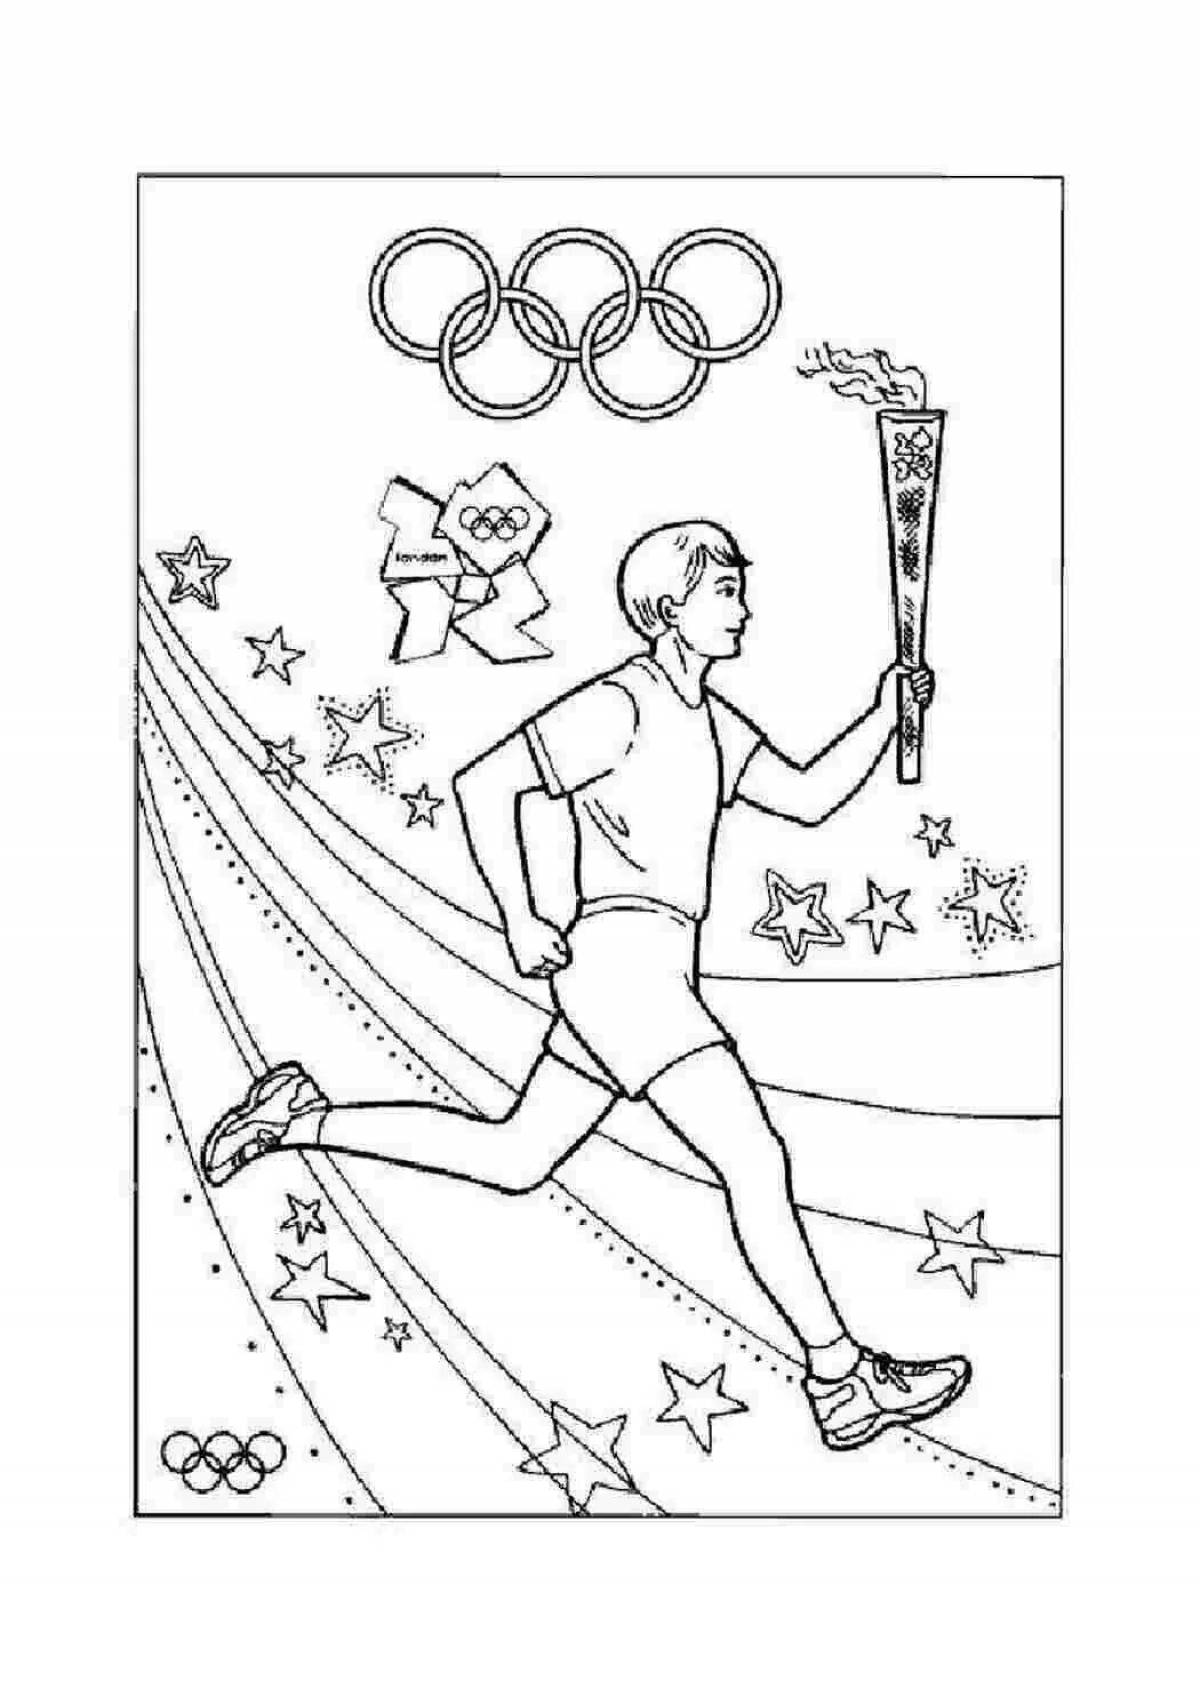 Amazing sports coloring pages for kids